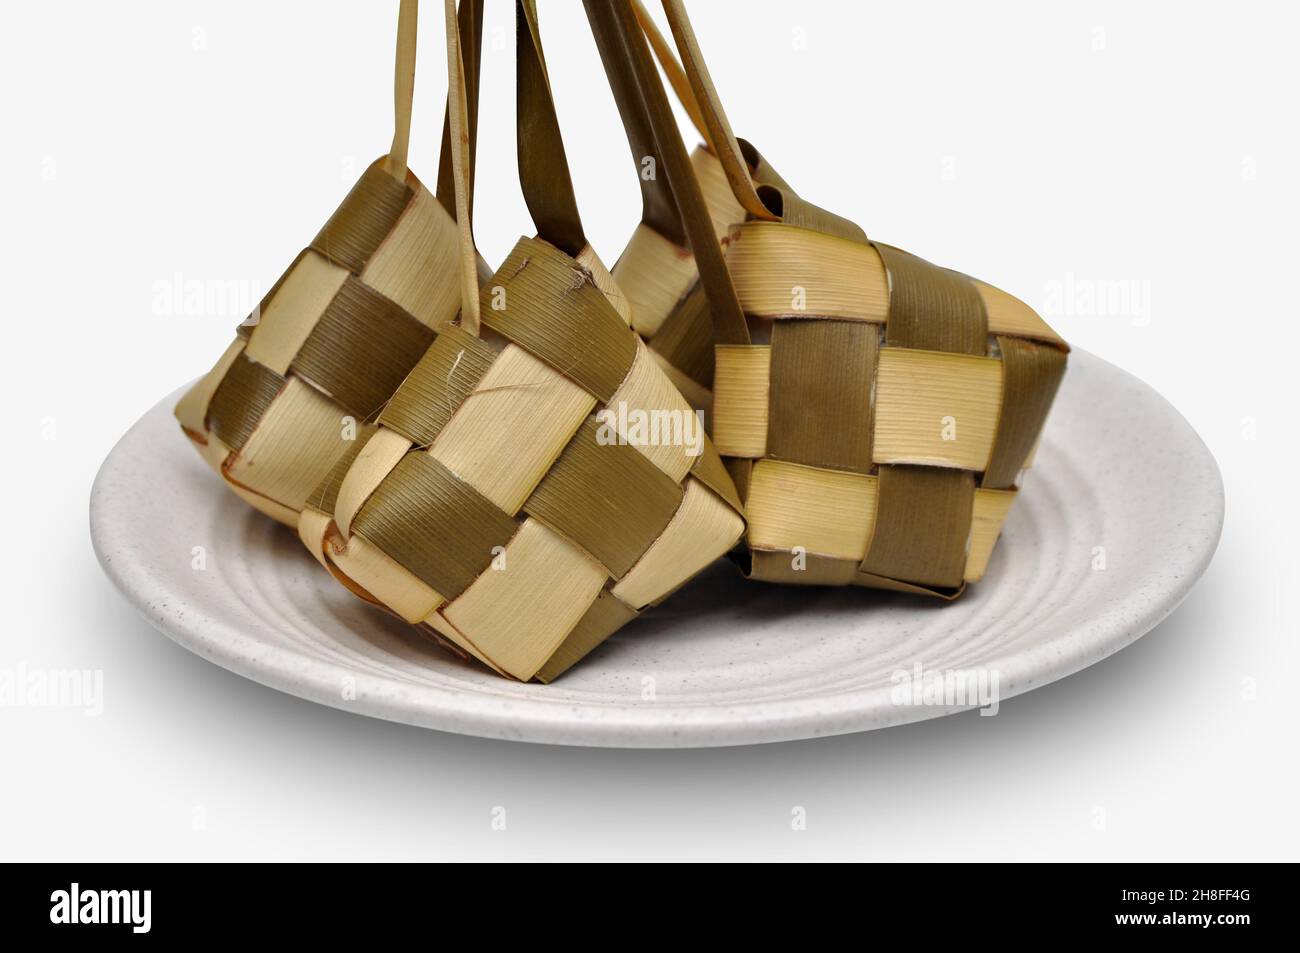 Ketupat is a type of dumpling made from rice packed inside a diamond-shaped container of woven palm leaf pouch. commonly found in Indonesia, Malaysia, Stock Photo